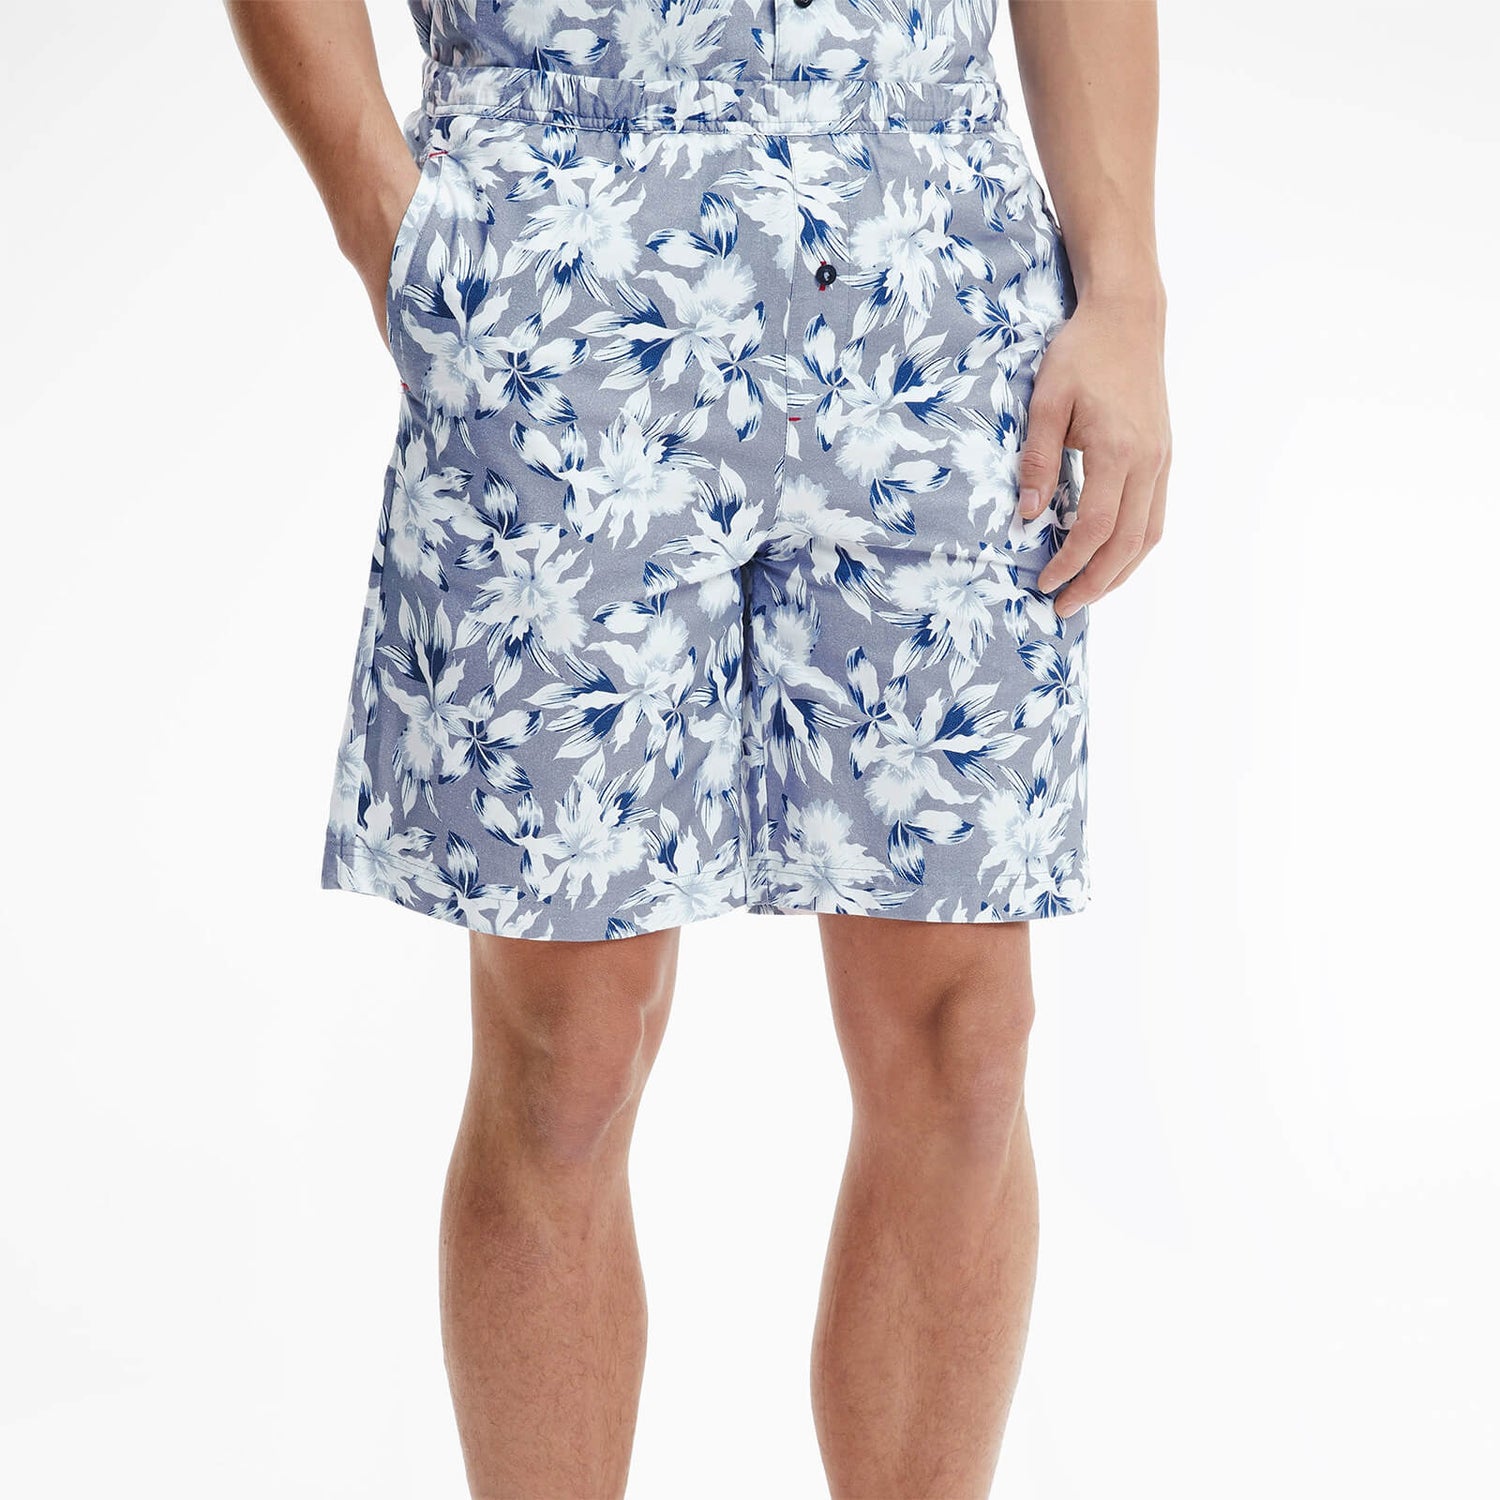 Tommy Hilfiger Men's Printed Shorts - Island Tropical - S